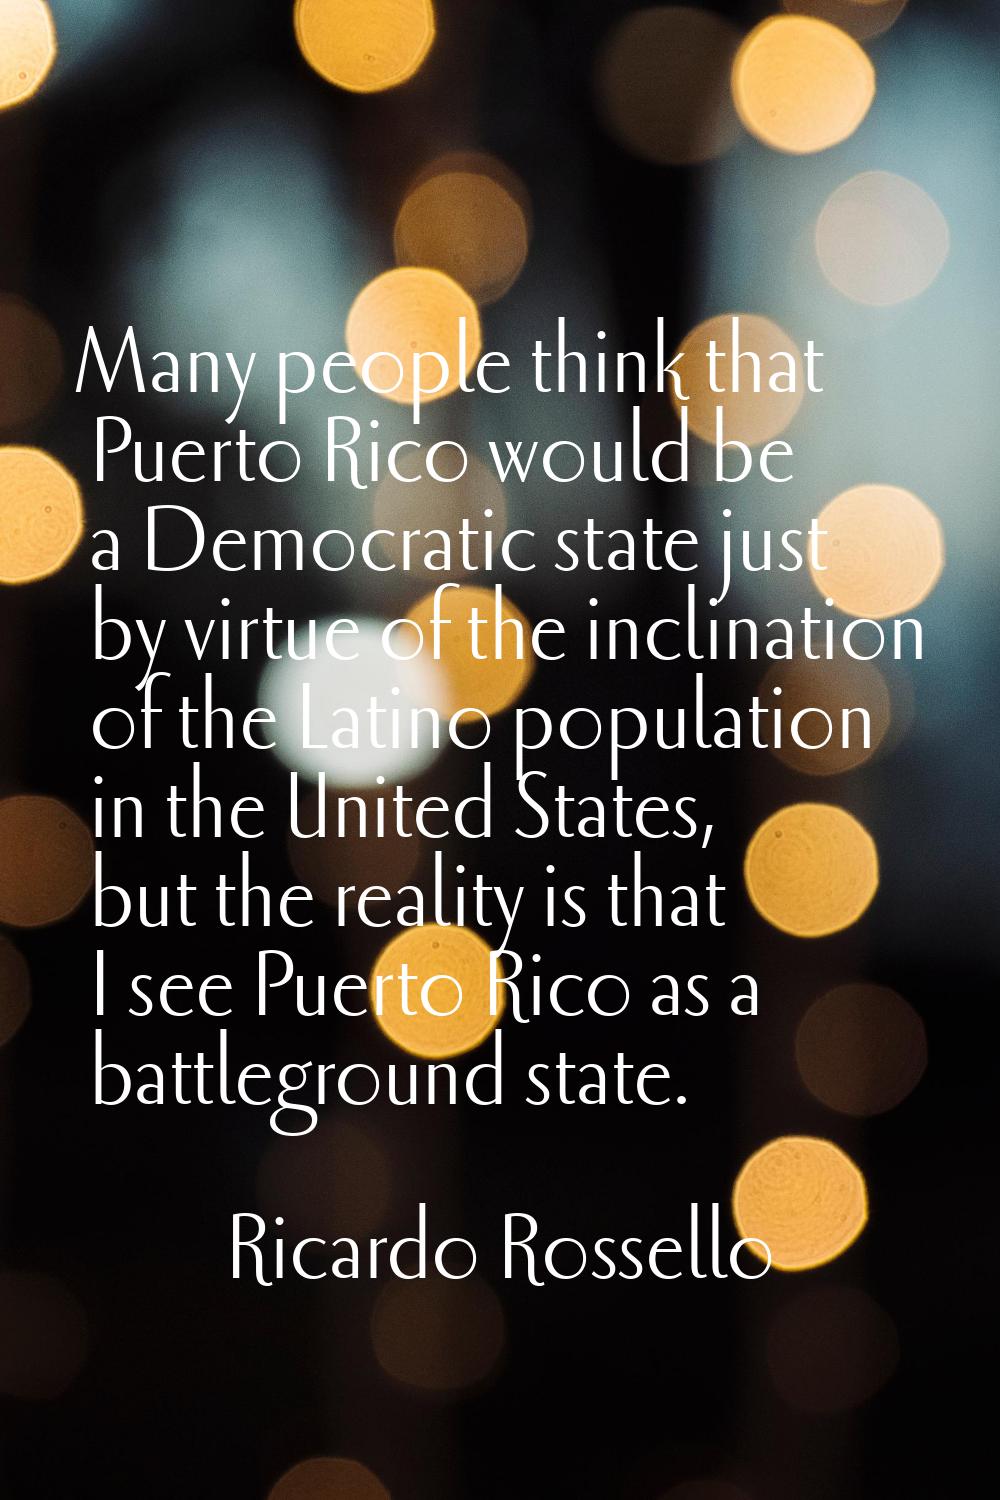 Many people think that Puerto Rico would be a Democratic state just by virtue of the inclination of